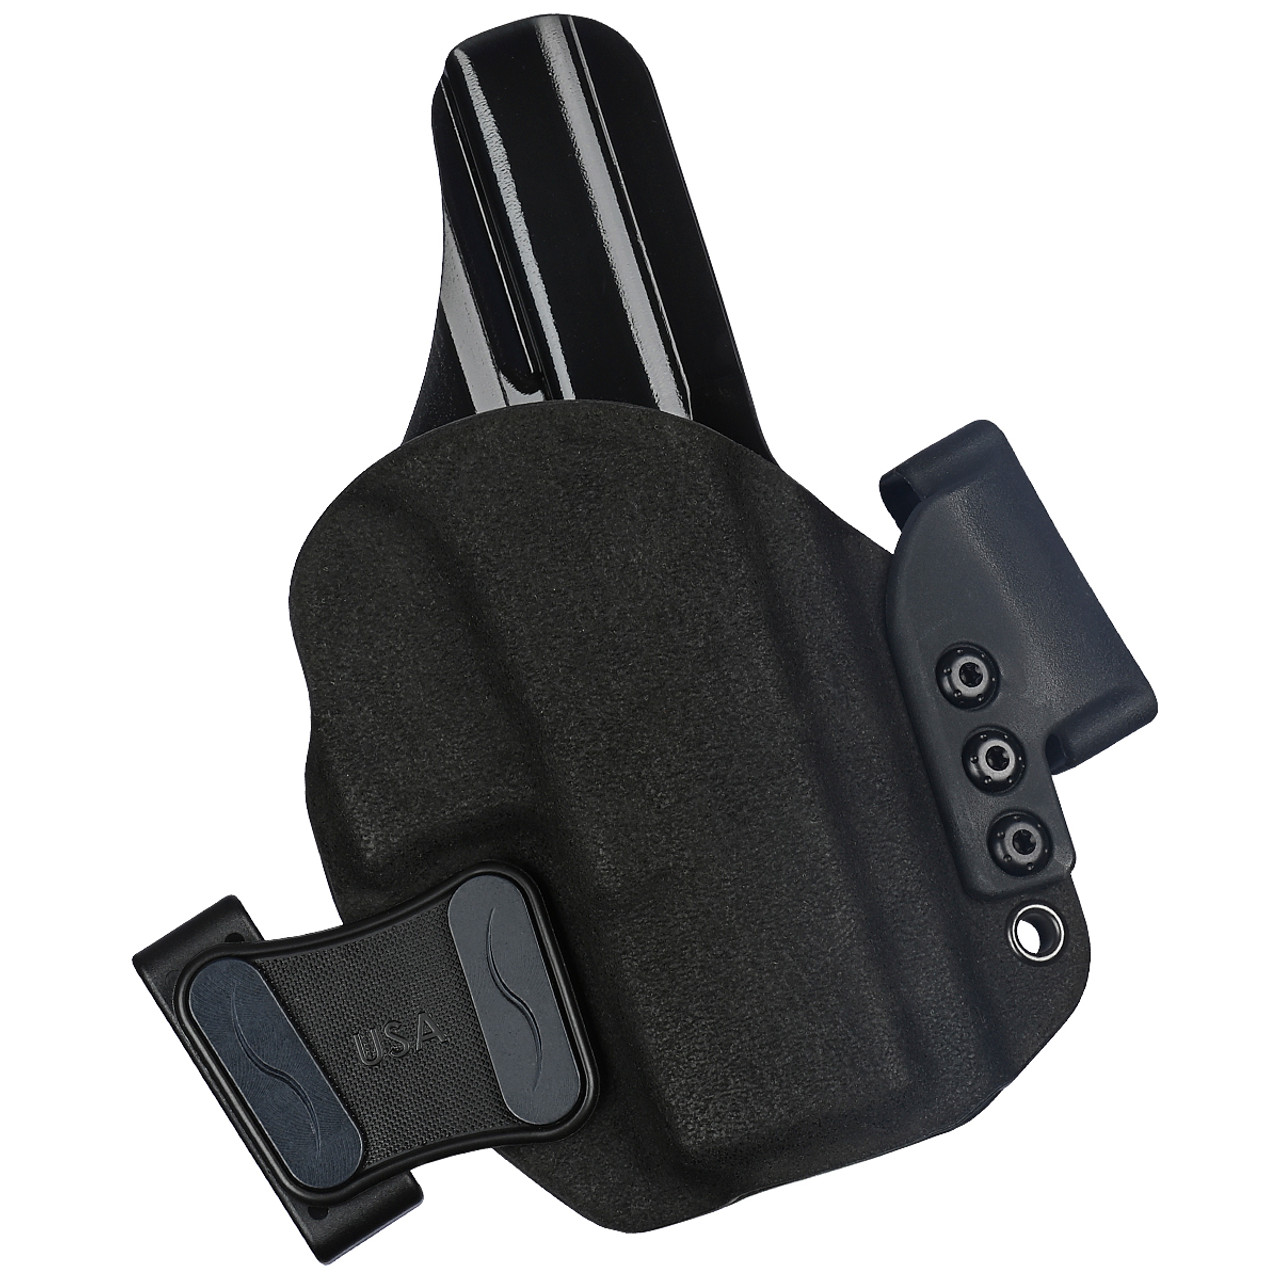 Revolver RTI Kydex Holster : G-Code Holsters